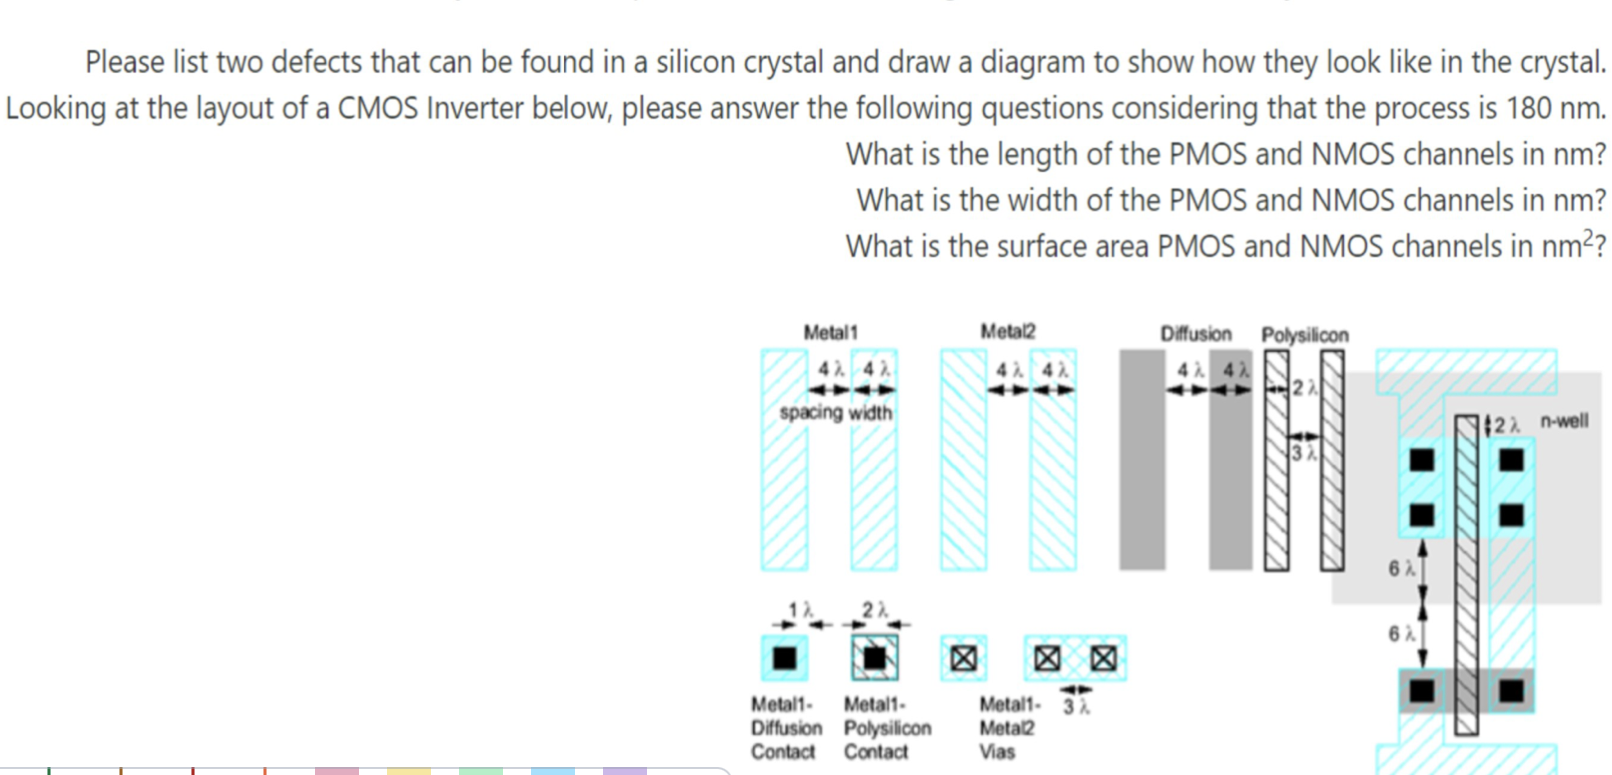 Please list two defects that can be found in a silicon crystal and draw a diagram to show how they look like in the crystal. Looking at the layout of a CMOS Inverter below, please answer the following questions considering that the process is 180 nm. What is the length of the PMOS and NMOS channels in nm? What is the width of the PMOS and NMOS channels in nm? What is the surface area PMOS and NMOS channels in nm^2?